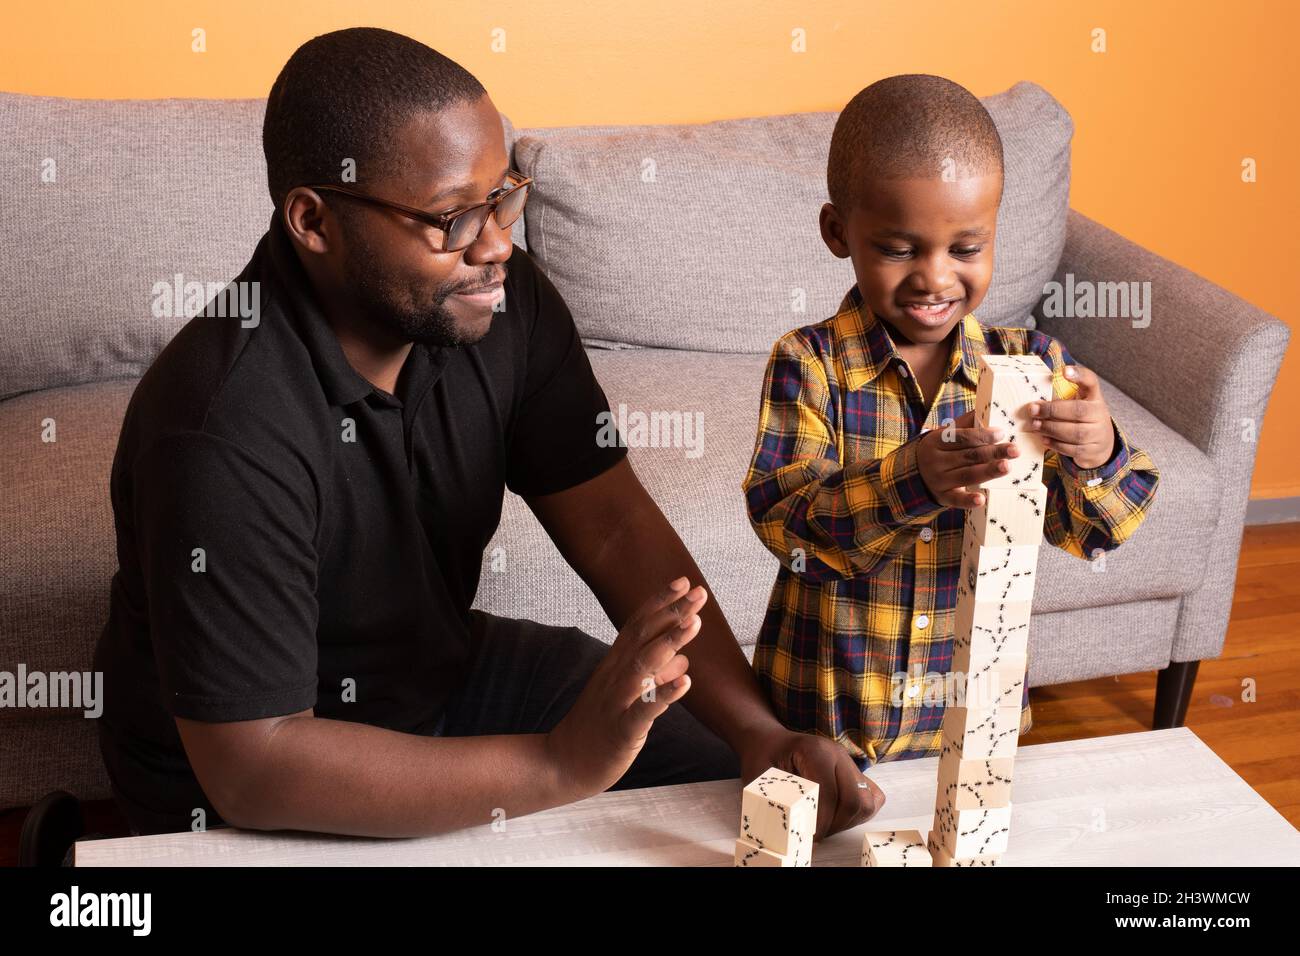 Preschool age boy at home building with wooden puzzle blocks, father encouraging him Stock Photo